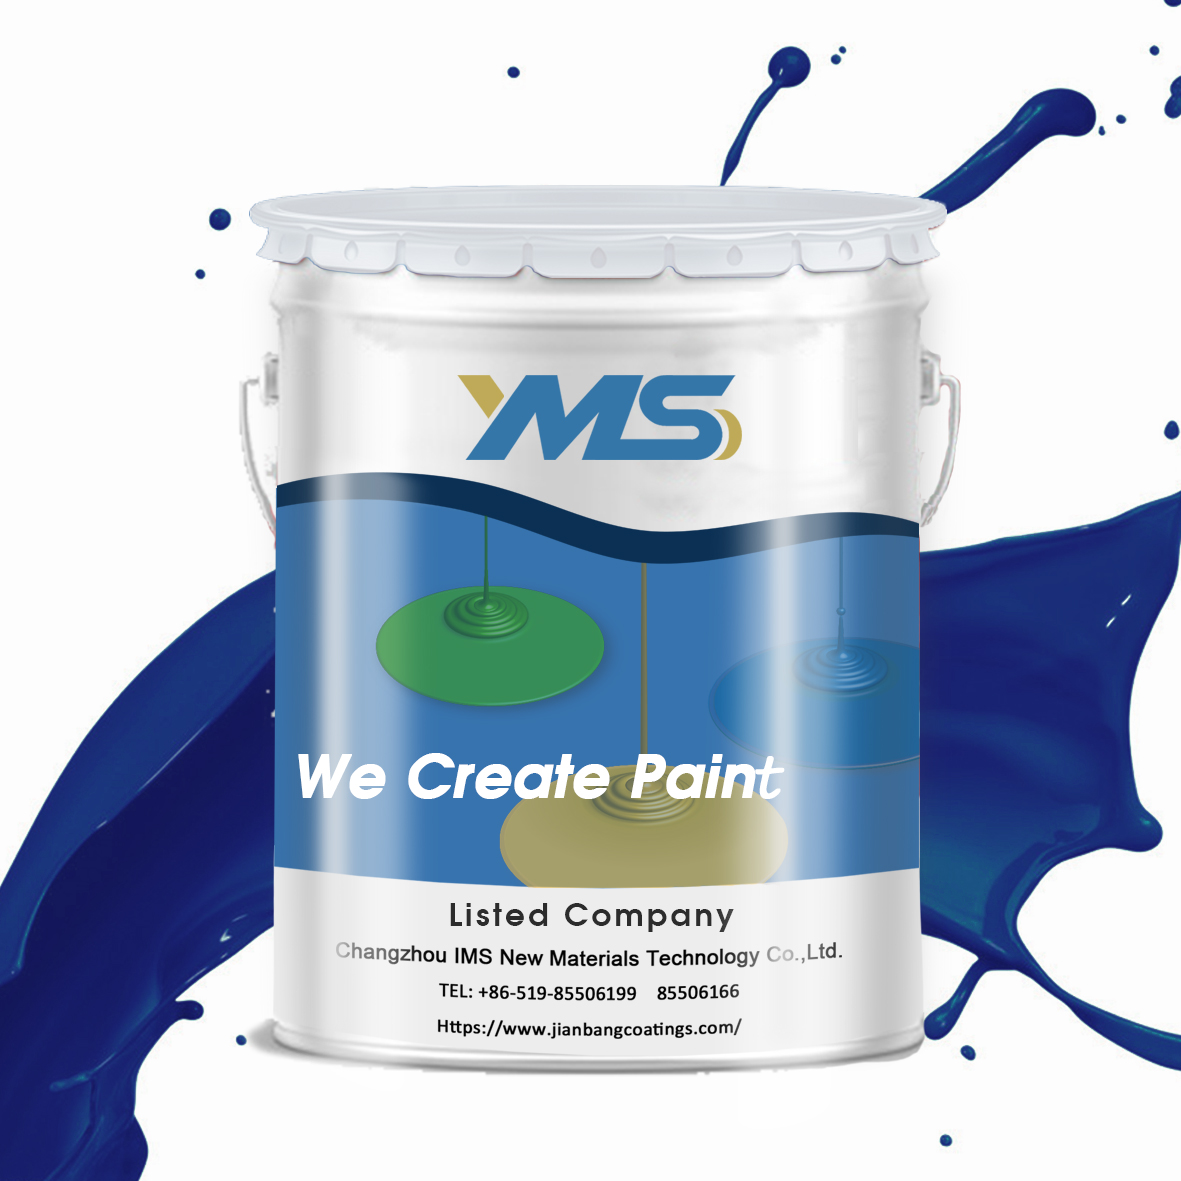 New epoxy paint for metal for business ship-1